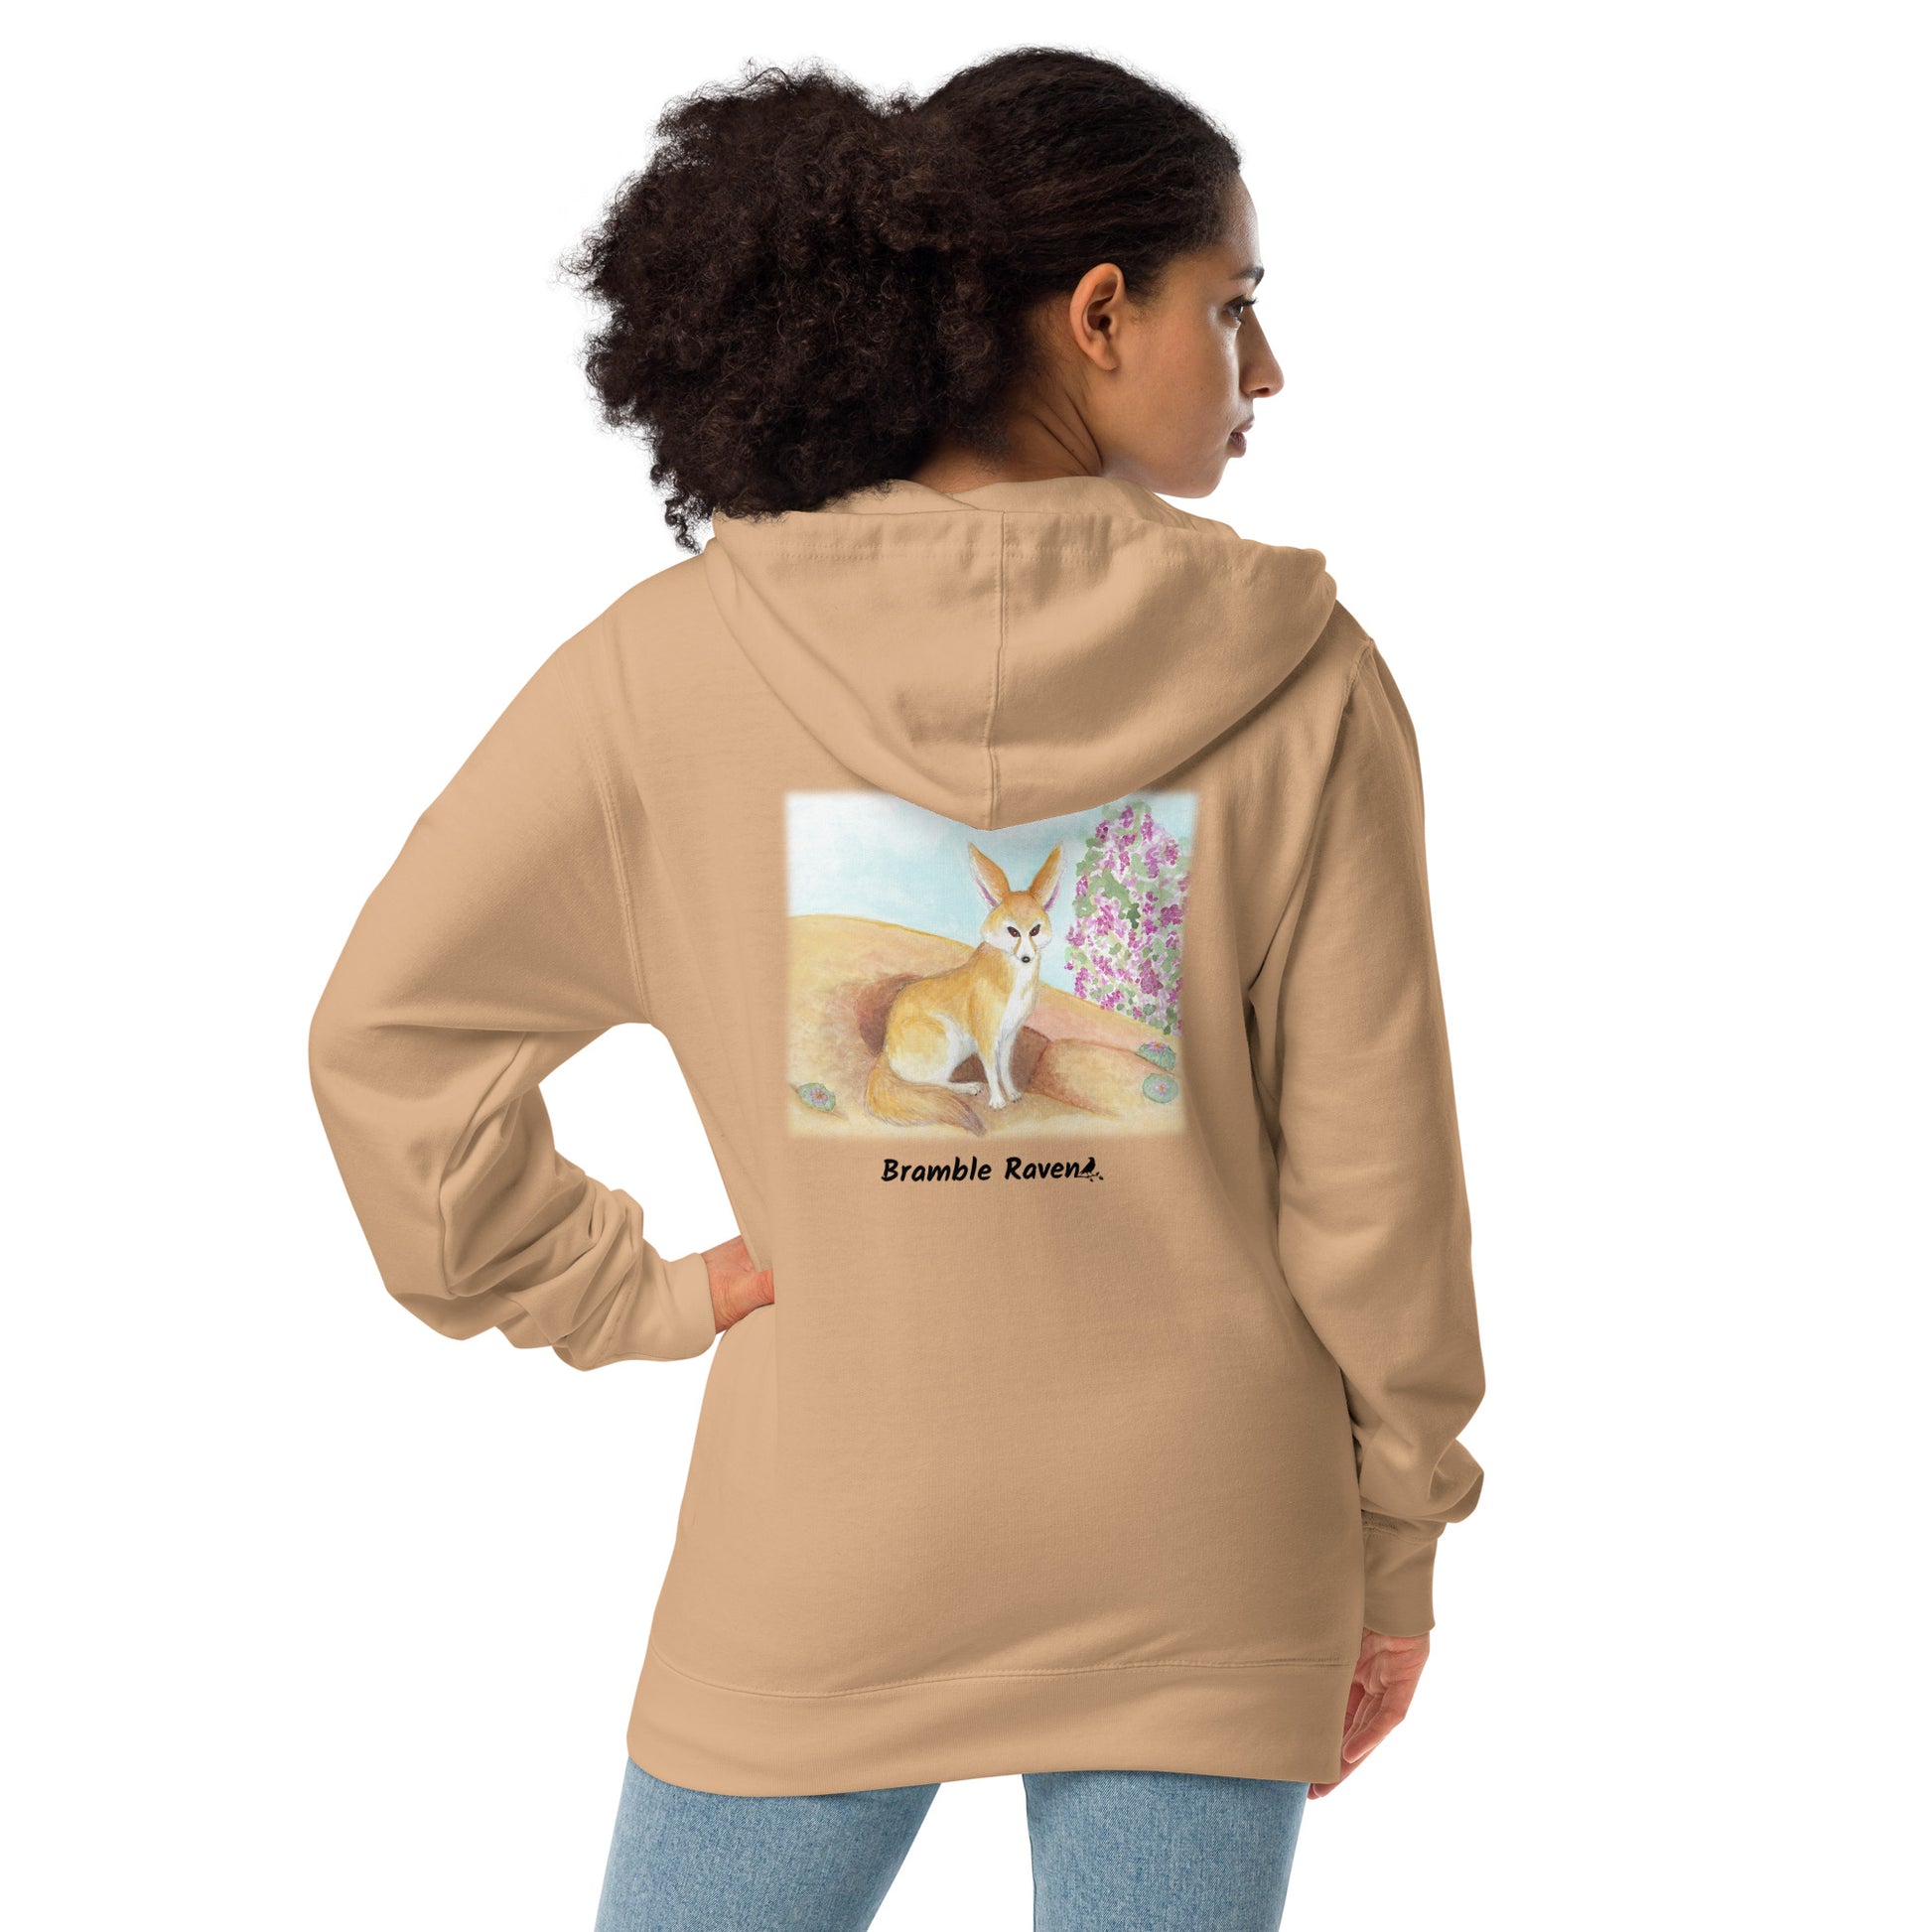 Unisex fleece-lined zip-up sandstone colored hoodie. Features original watercolor painting of a fennec fox in the desert on the back of the hoodie. Shown on female model.